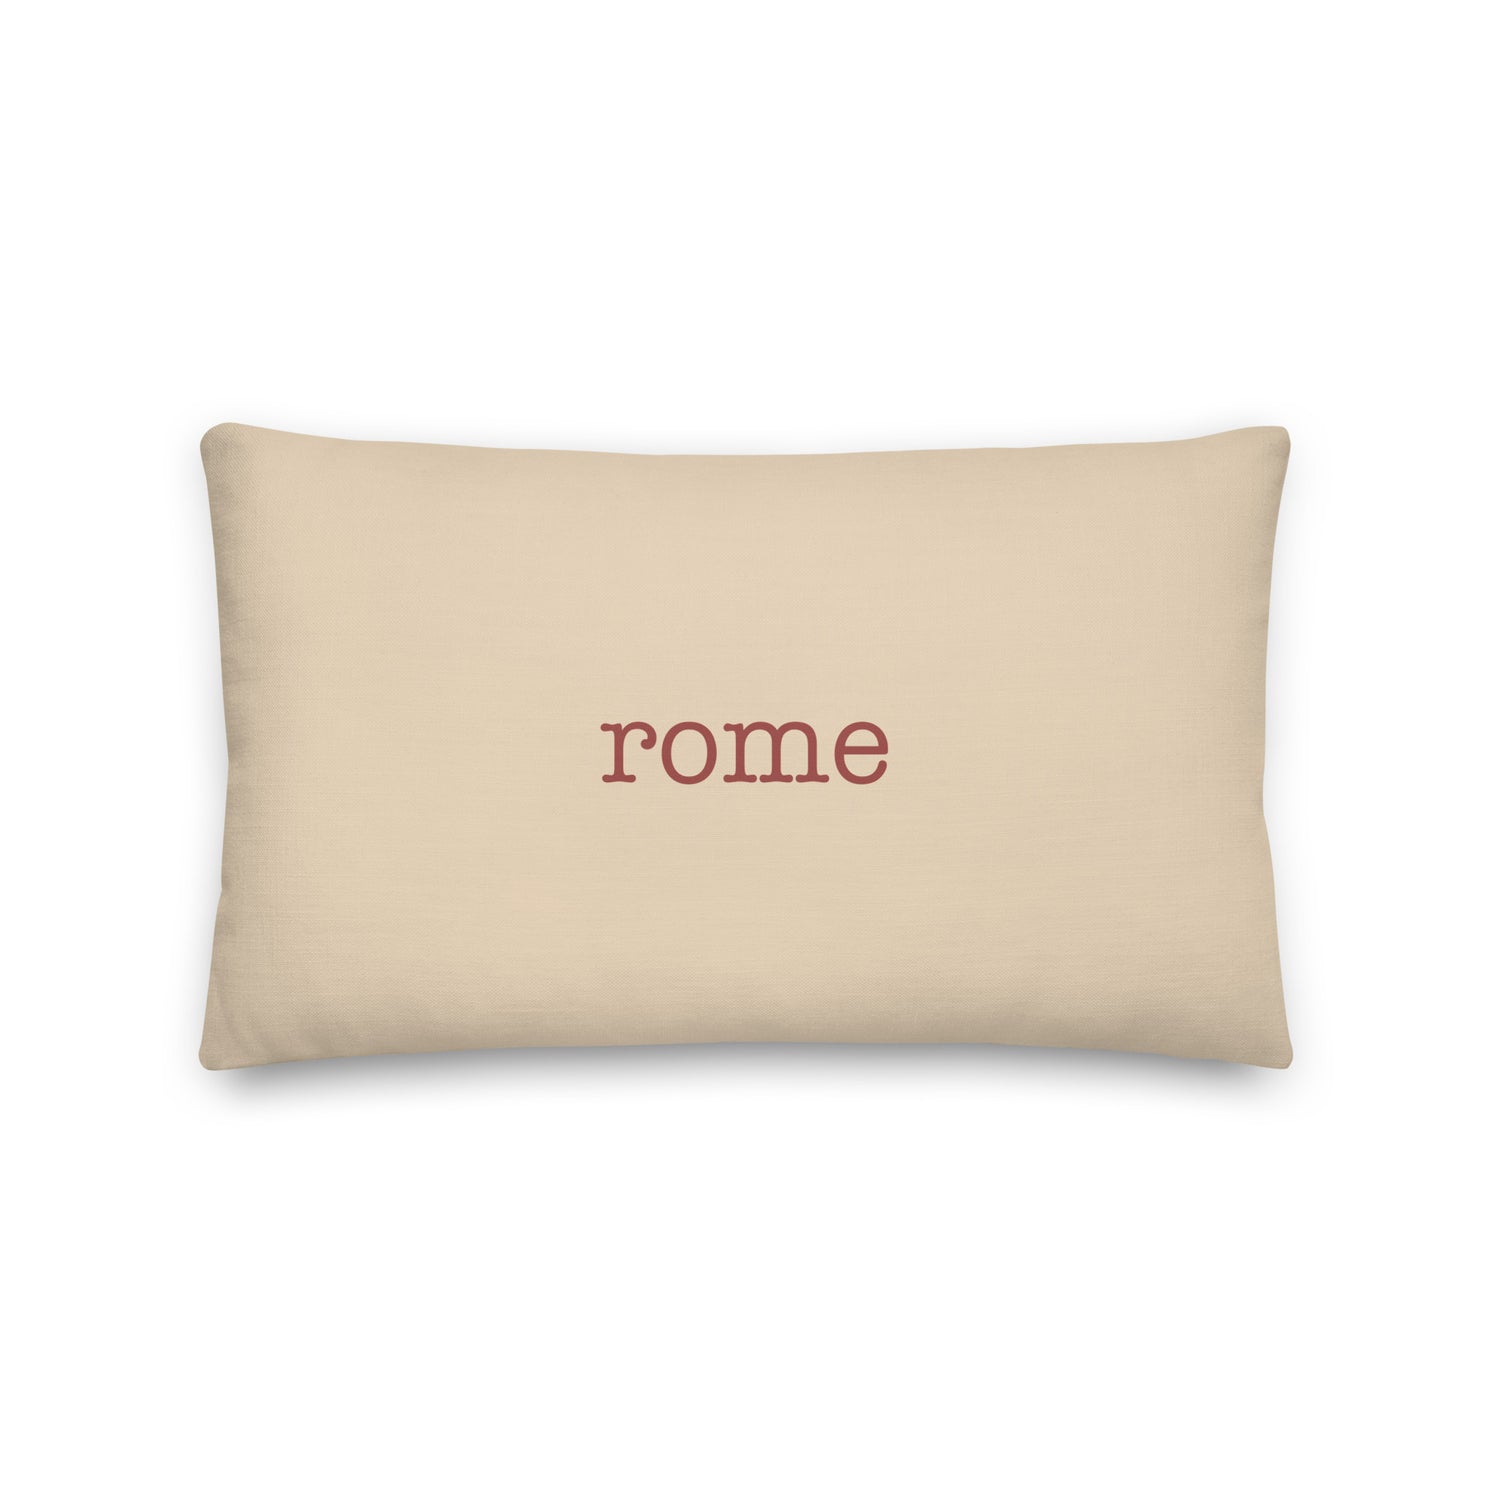 Rome Italy Pillows and Blankets • FCO Airport Code